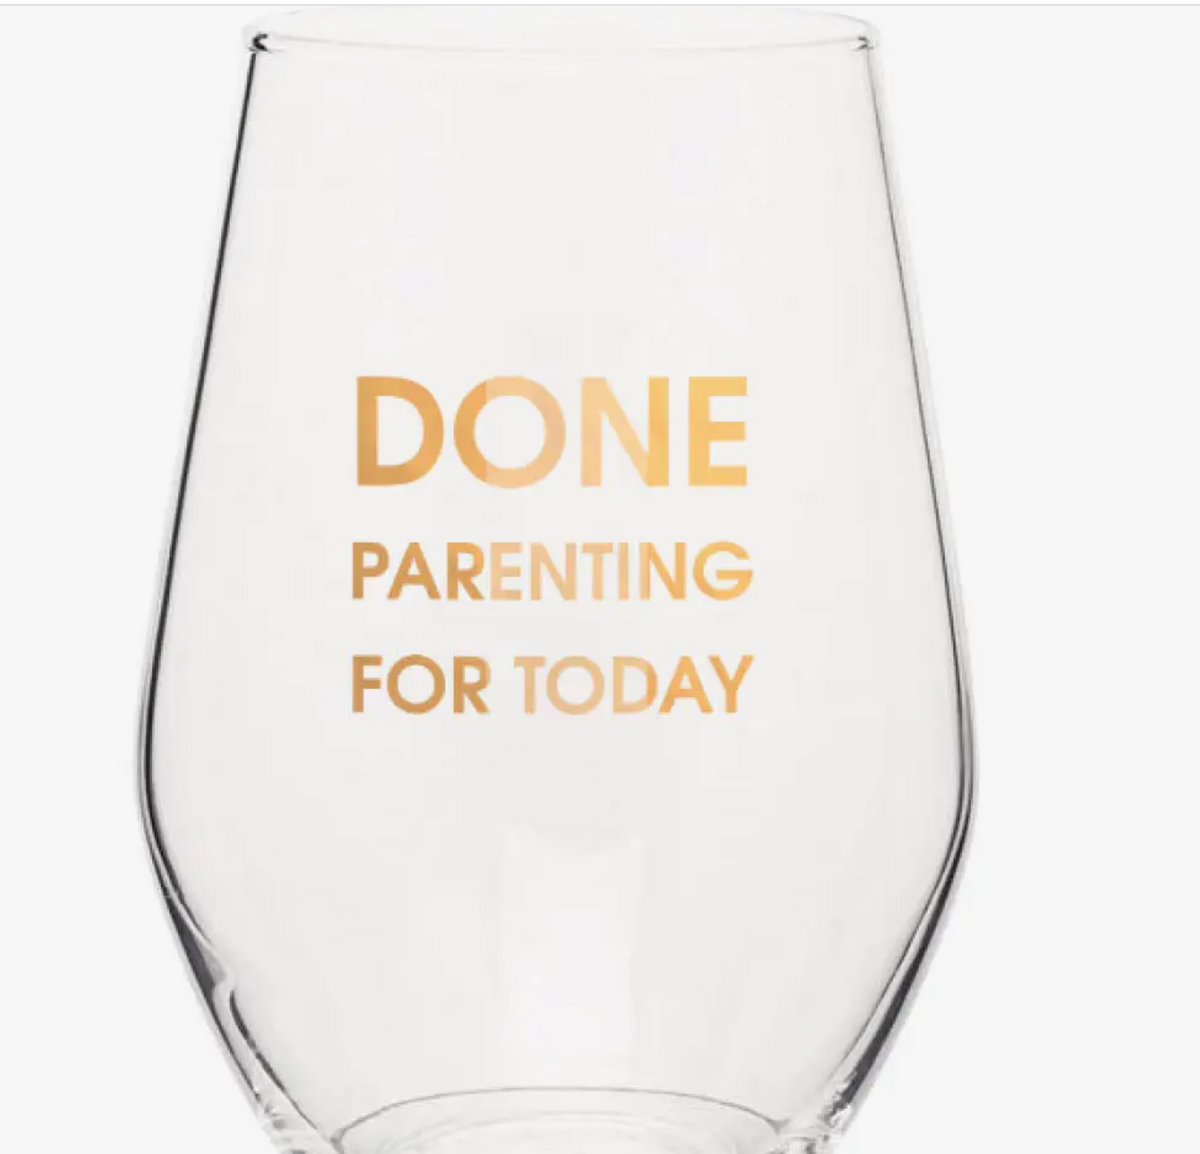 Chez Gagn'e - Done Parenting For Today Stemless Wine Glass